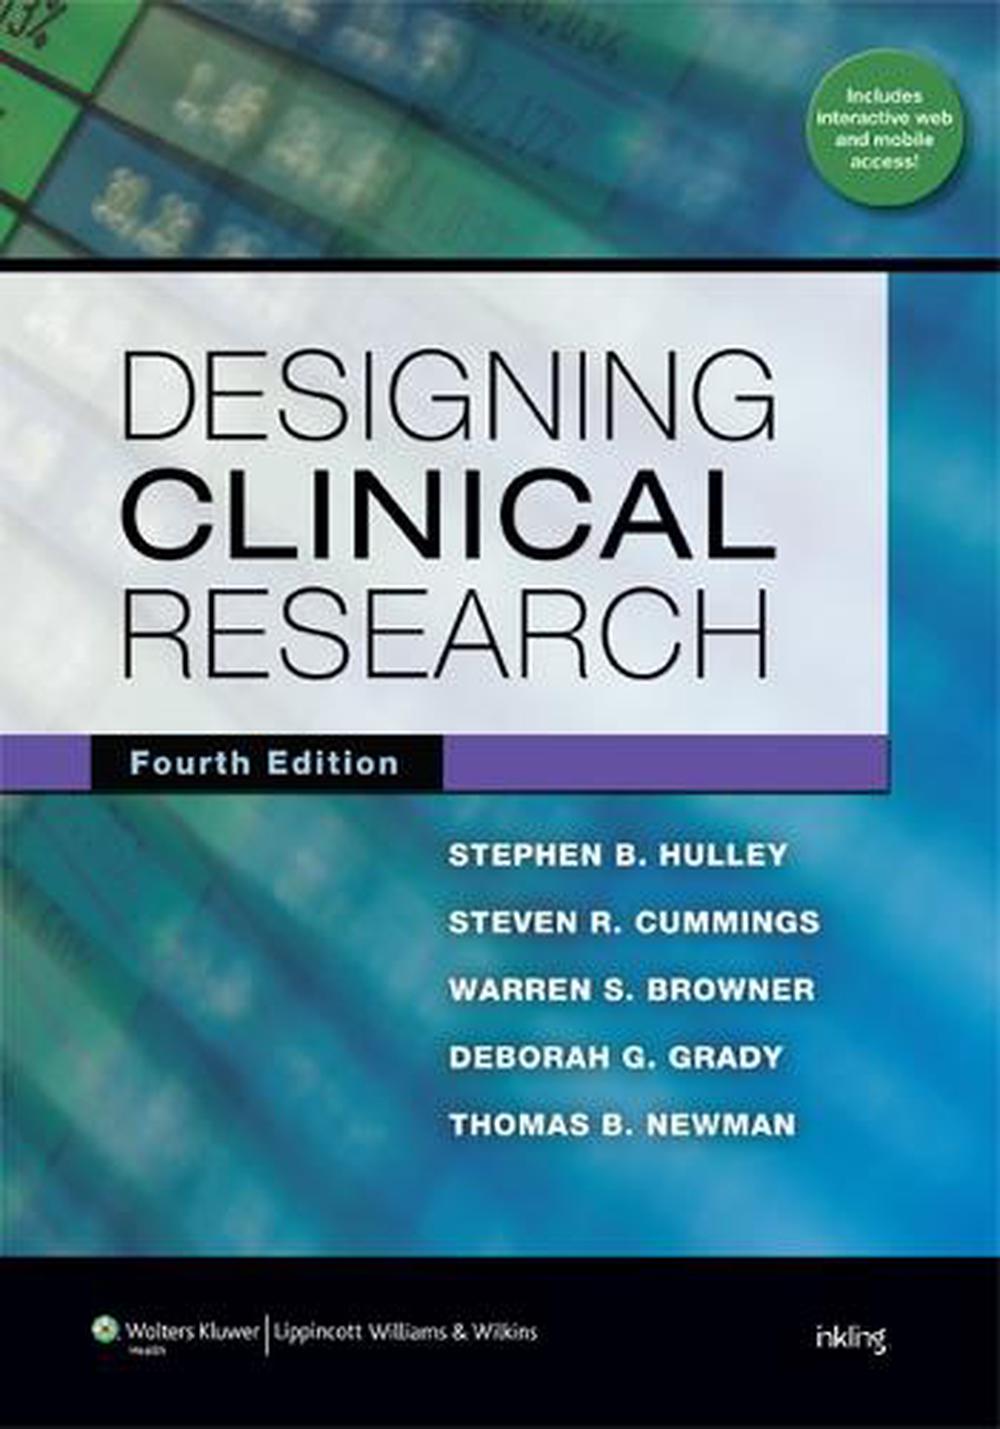 clinical research textbook pdf